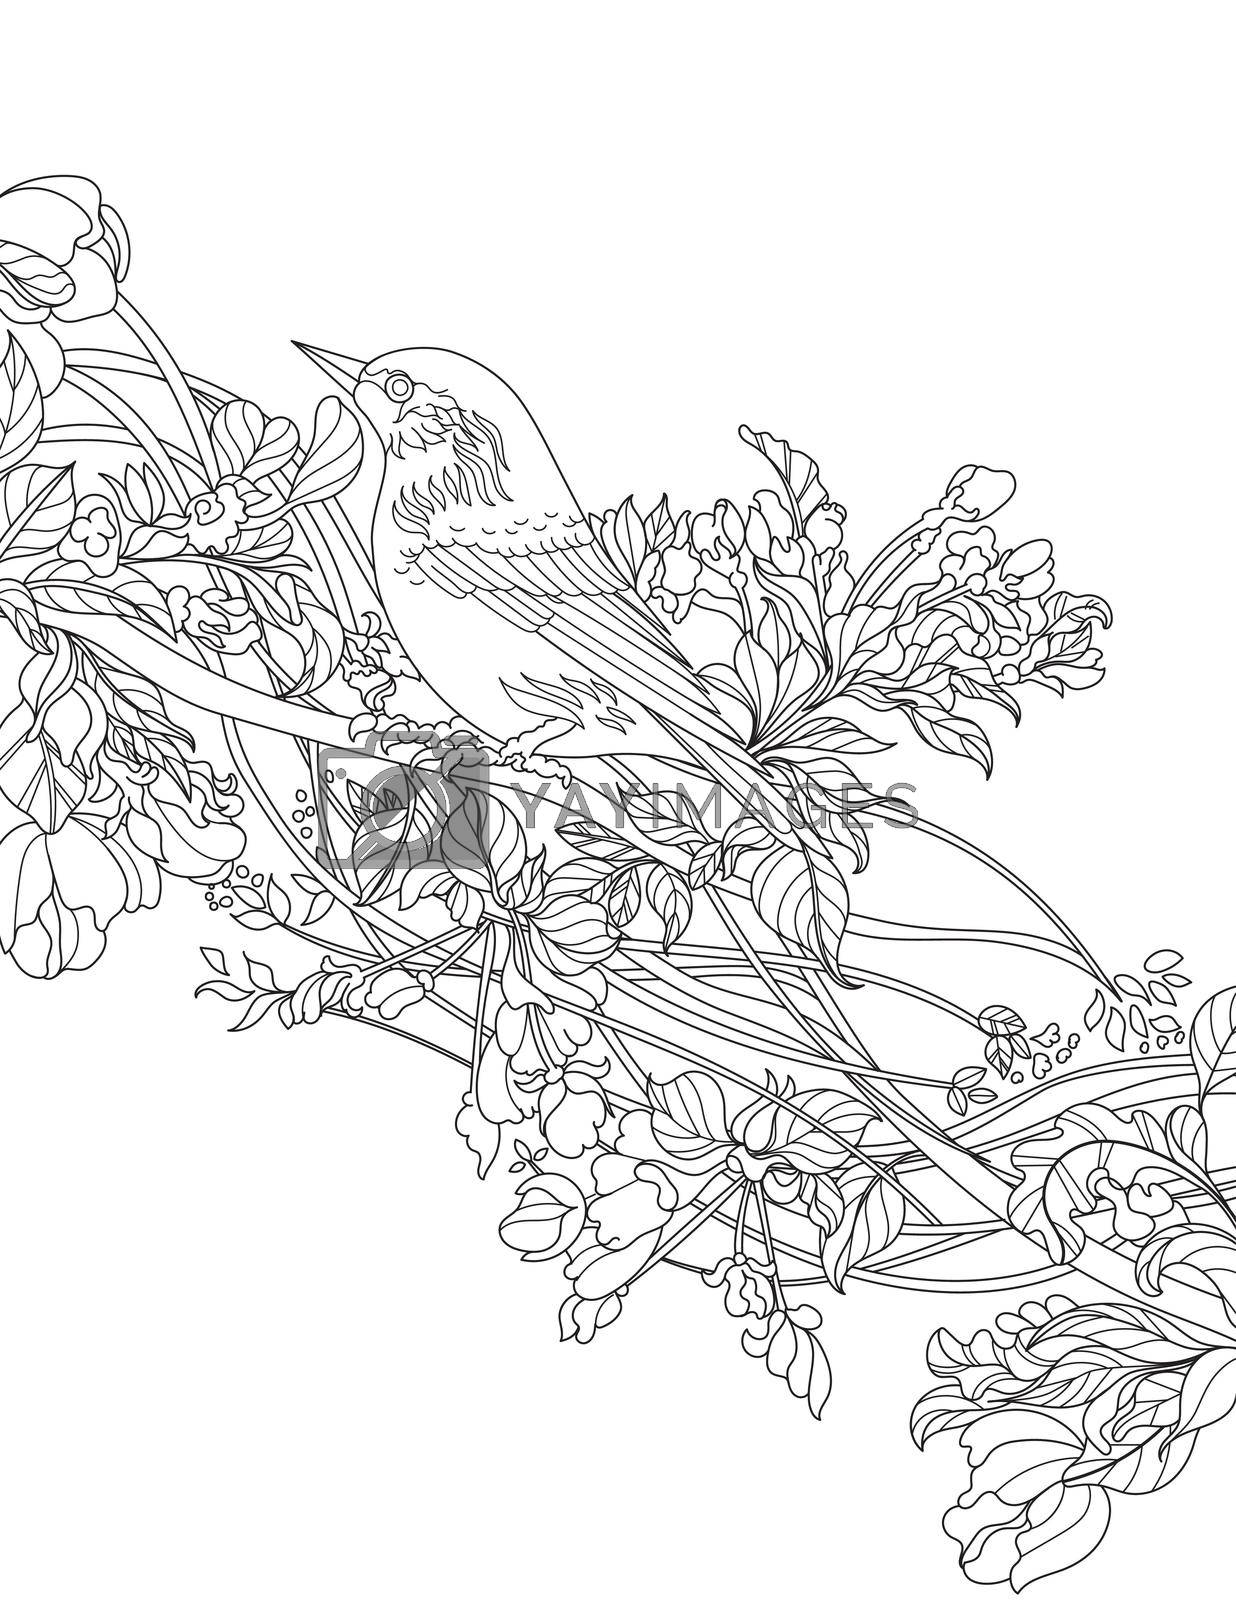 Royalty free image of Bird Standing On Tree Branch Line Drawing Colouring Book idea by nialowwa